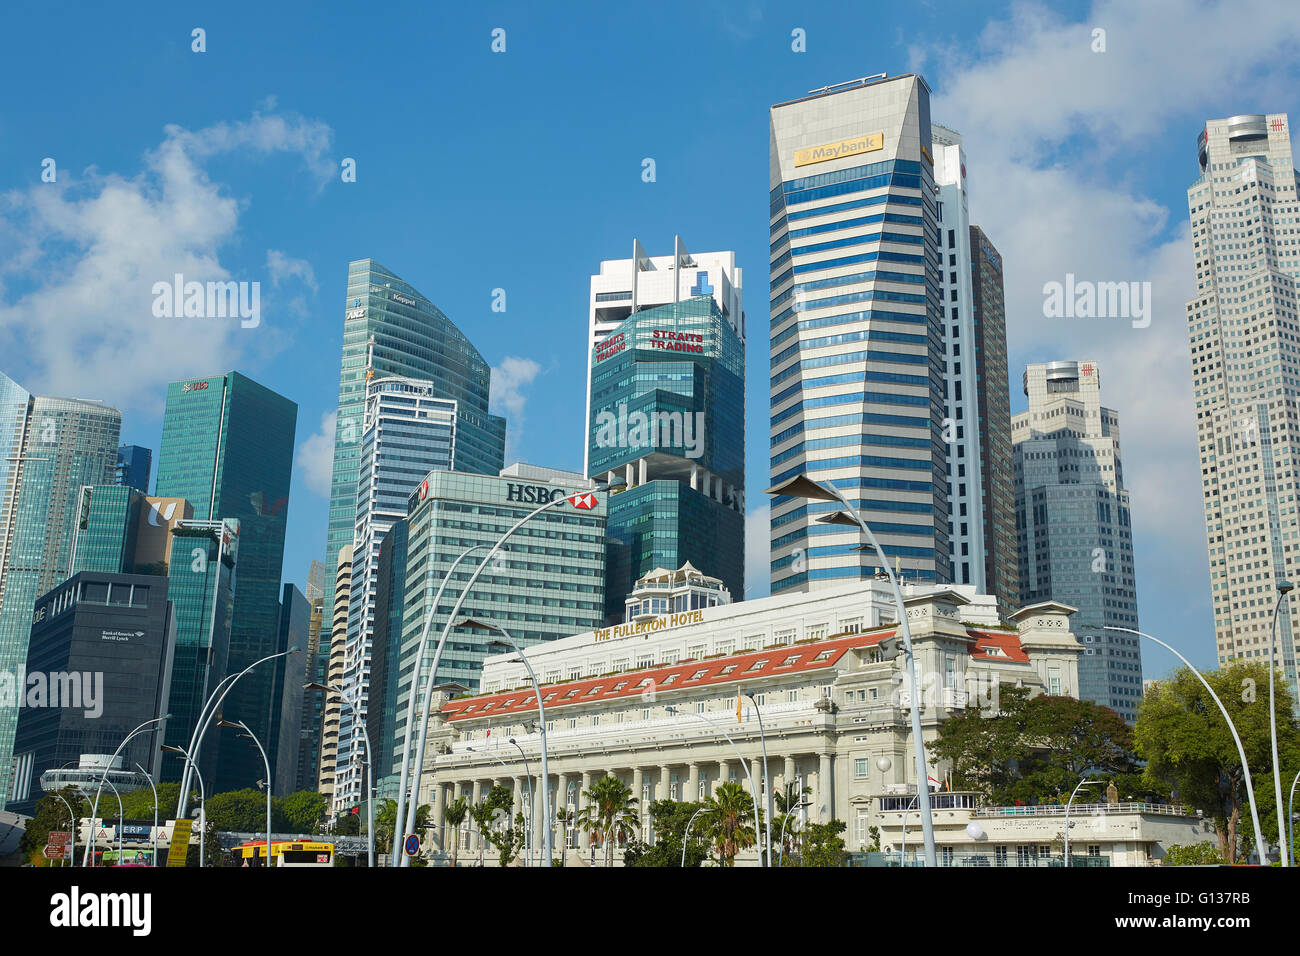 The Fullerton Hotel With The Singapore Business District Skyline Behind. Stock Photo